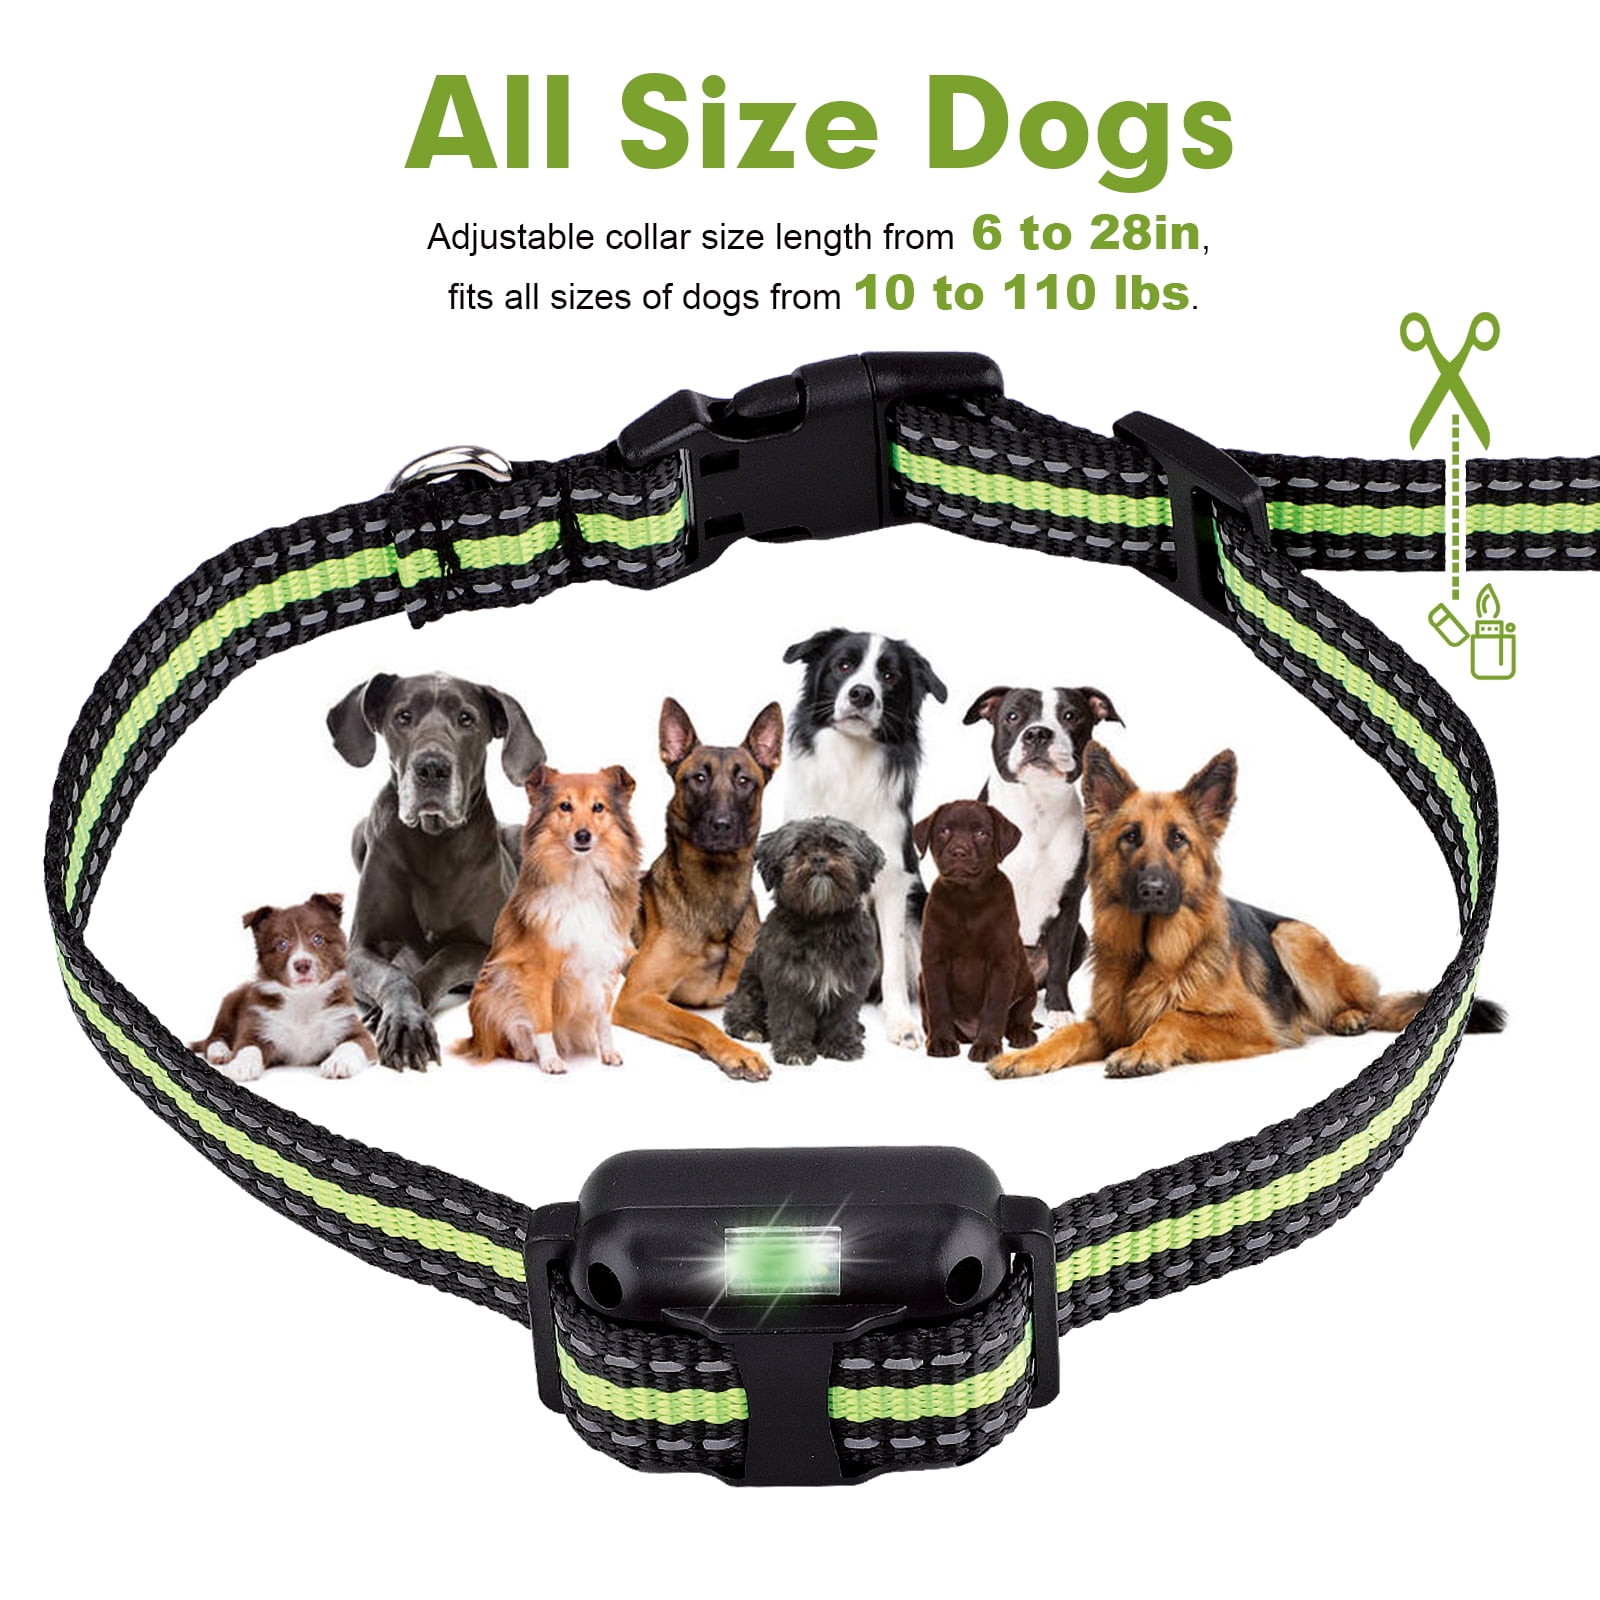 Stay Healthy and Active' Dog Treats [KA21#1073 Tasty Dog Treats] - $7.99 :  Best quality dog supplies at crazy reasonable prices - harnesses, leashes,  collars, muzzles and dog training equipment